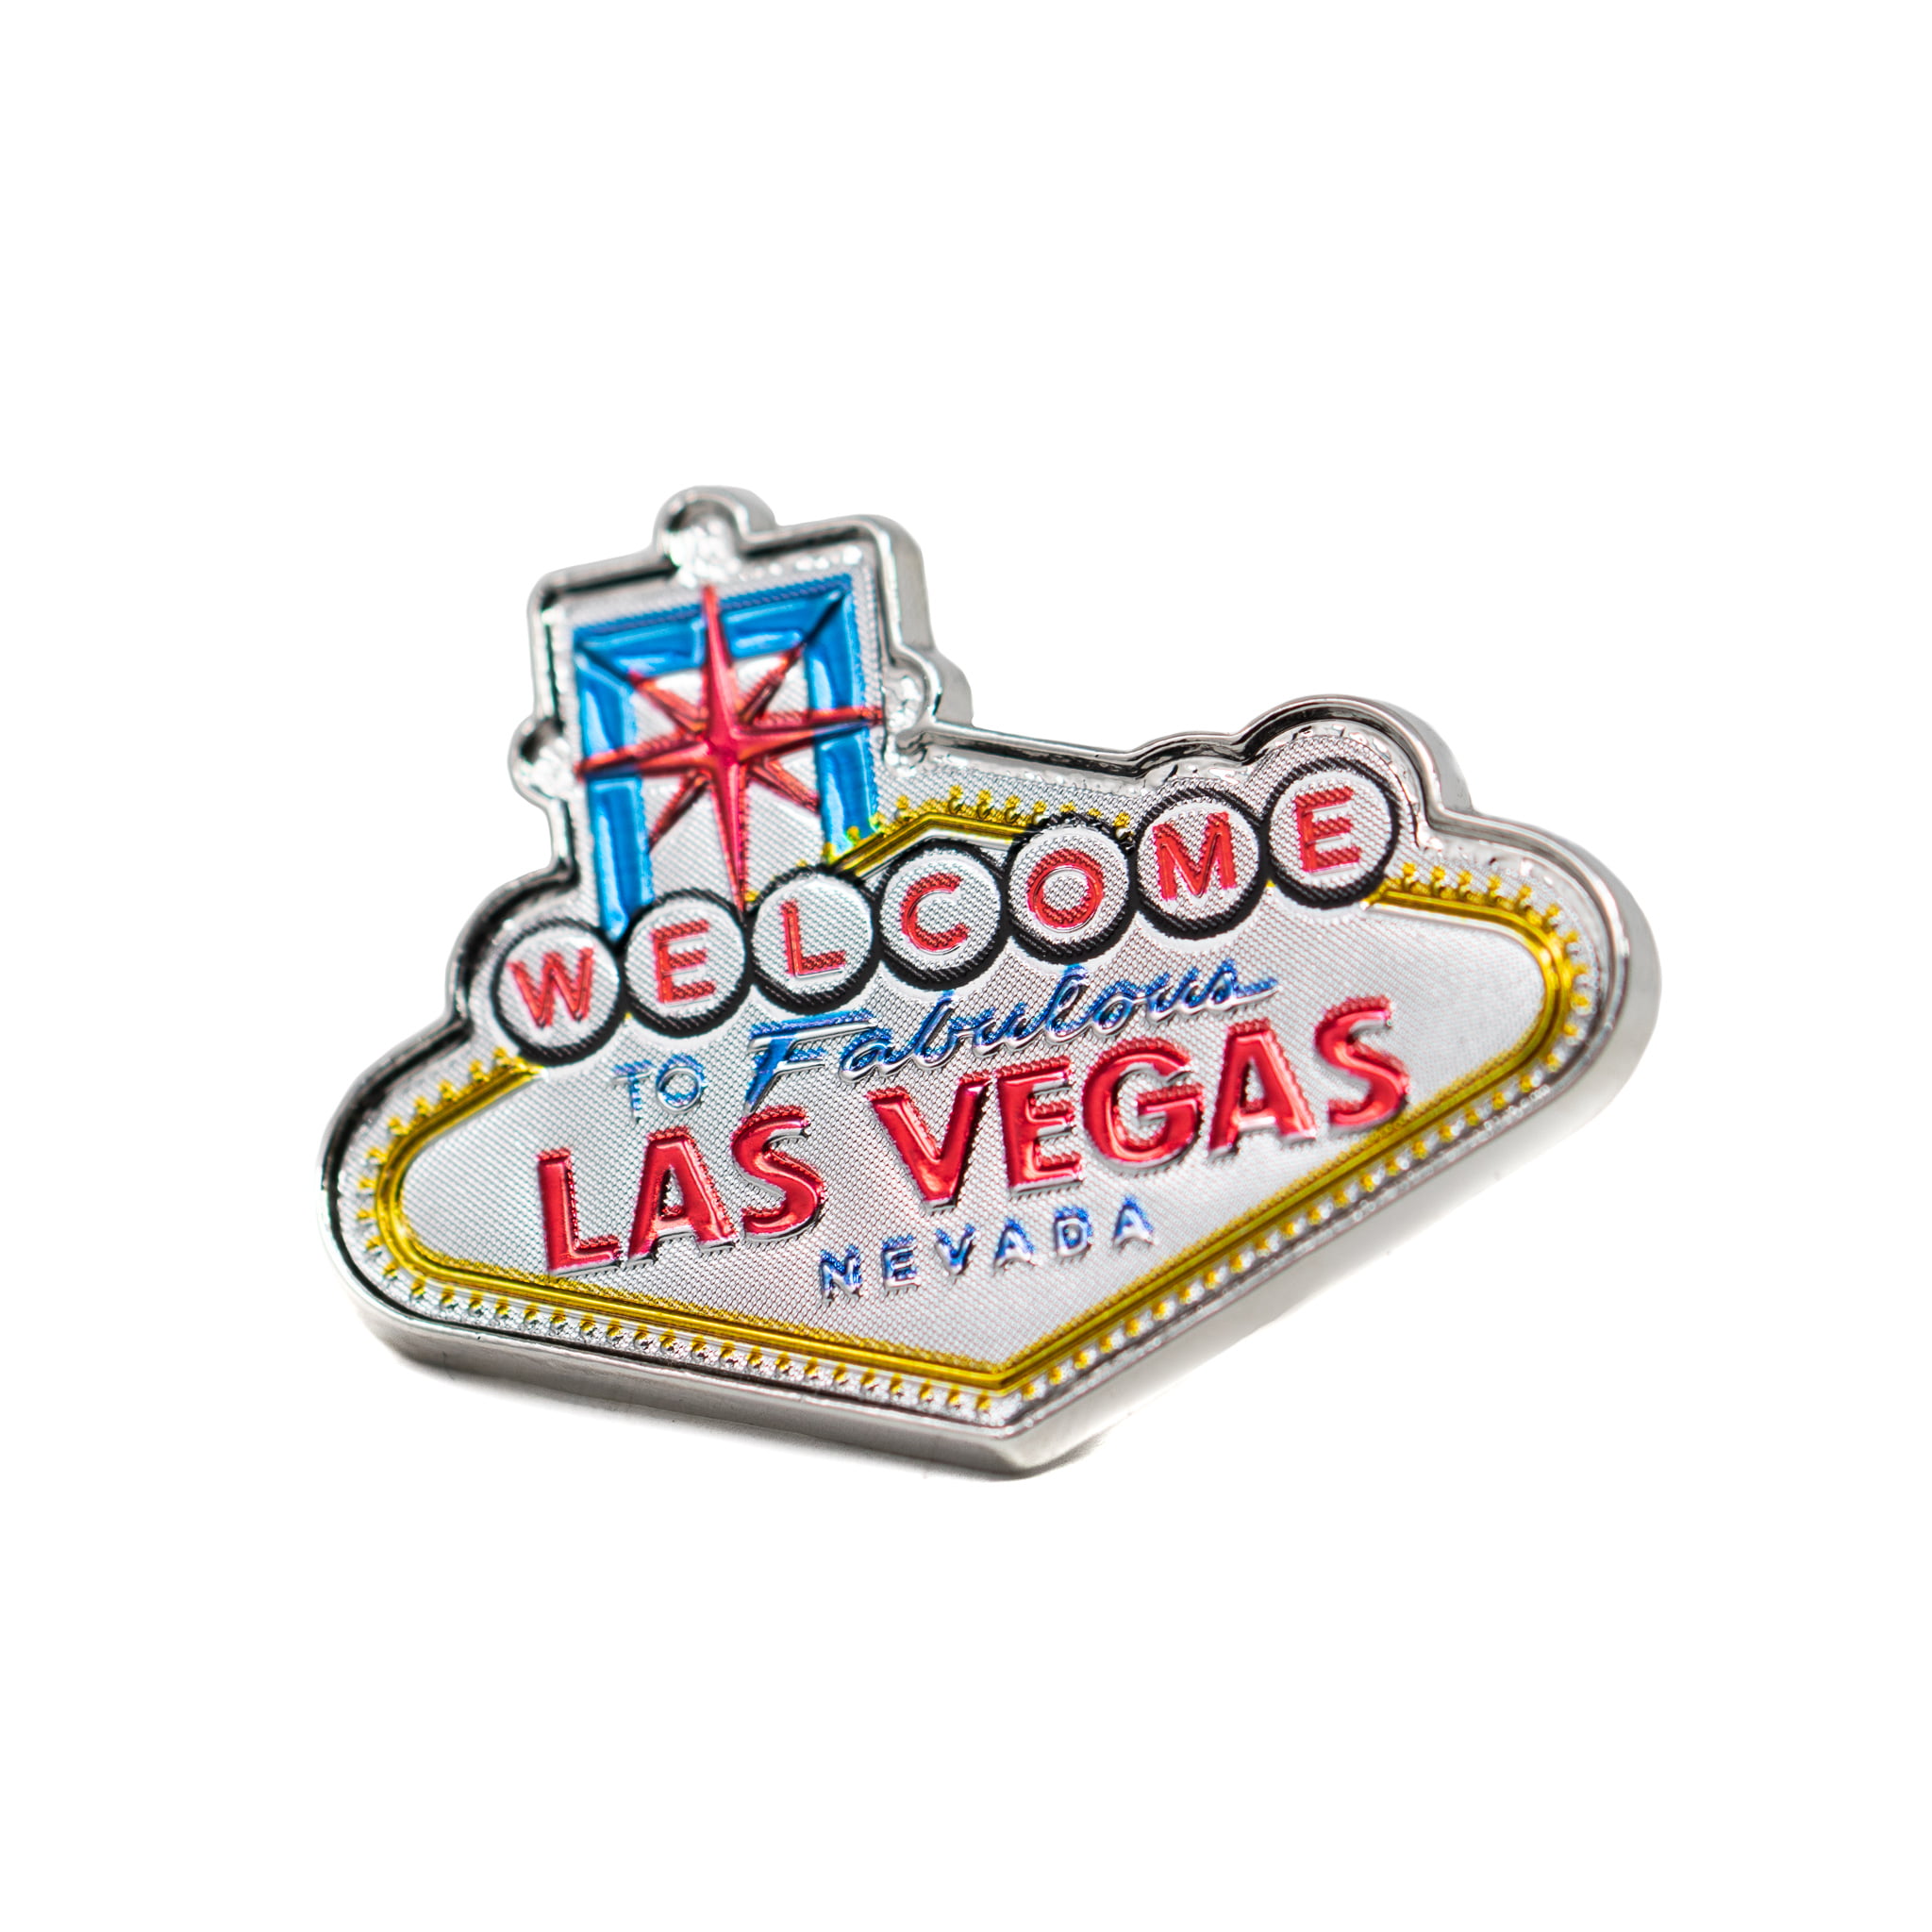 Welcome To Las Vegas Topper Novelty Pencil